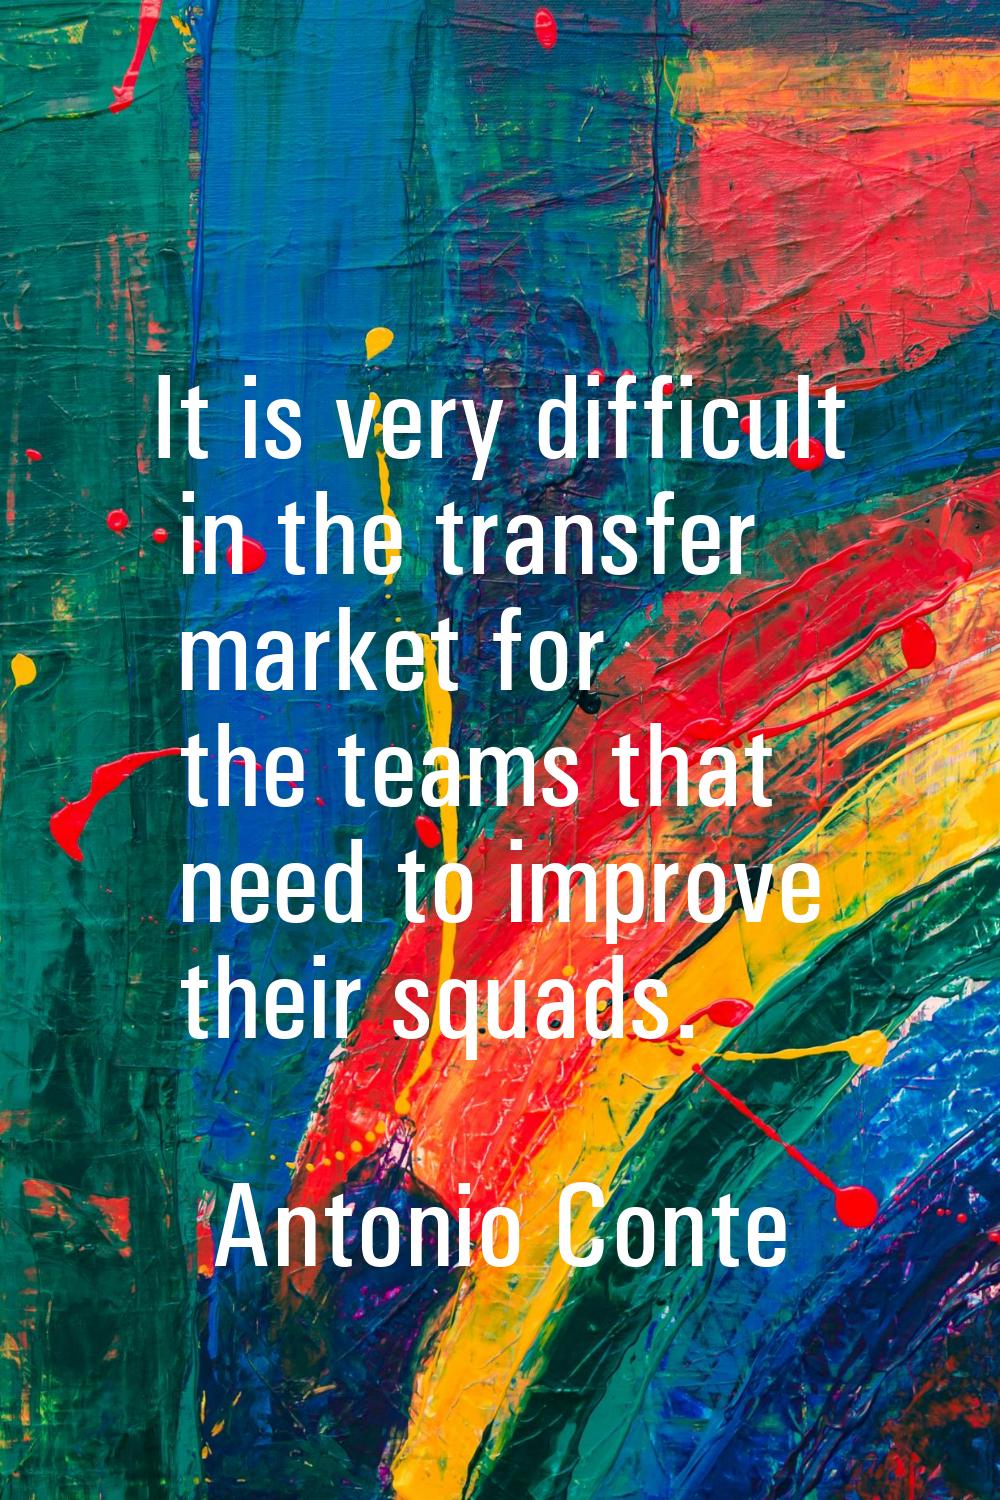 It is very difficult in the transfer market for the teams that need to improve their squads.